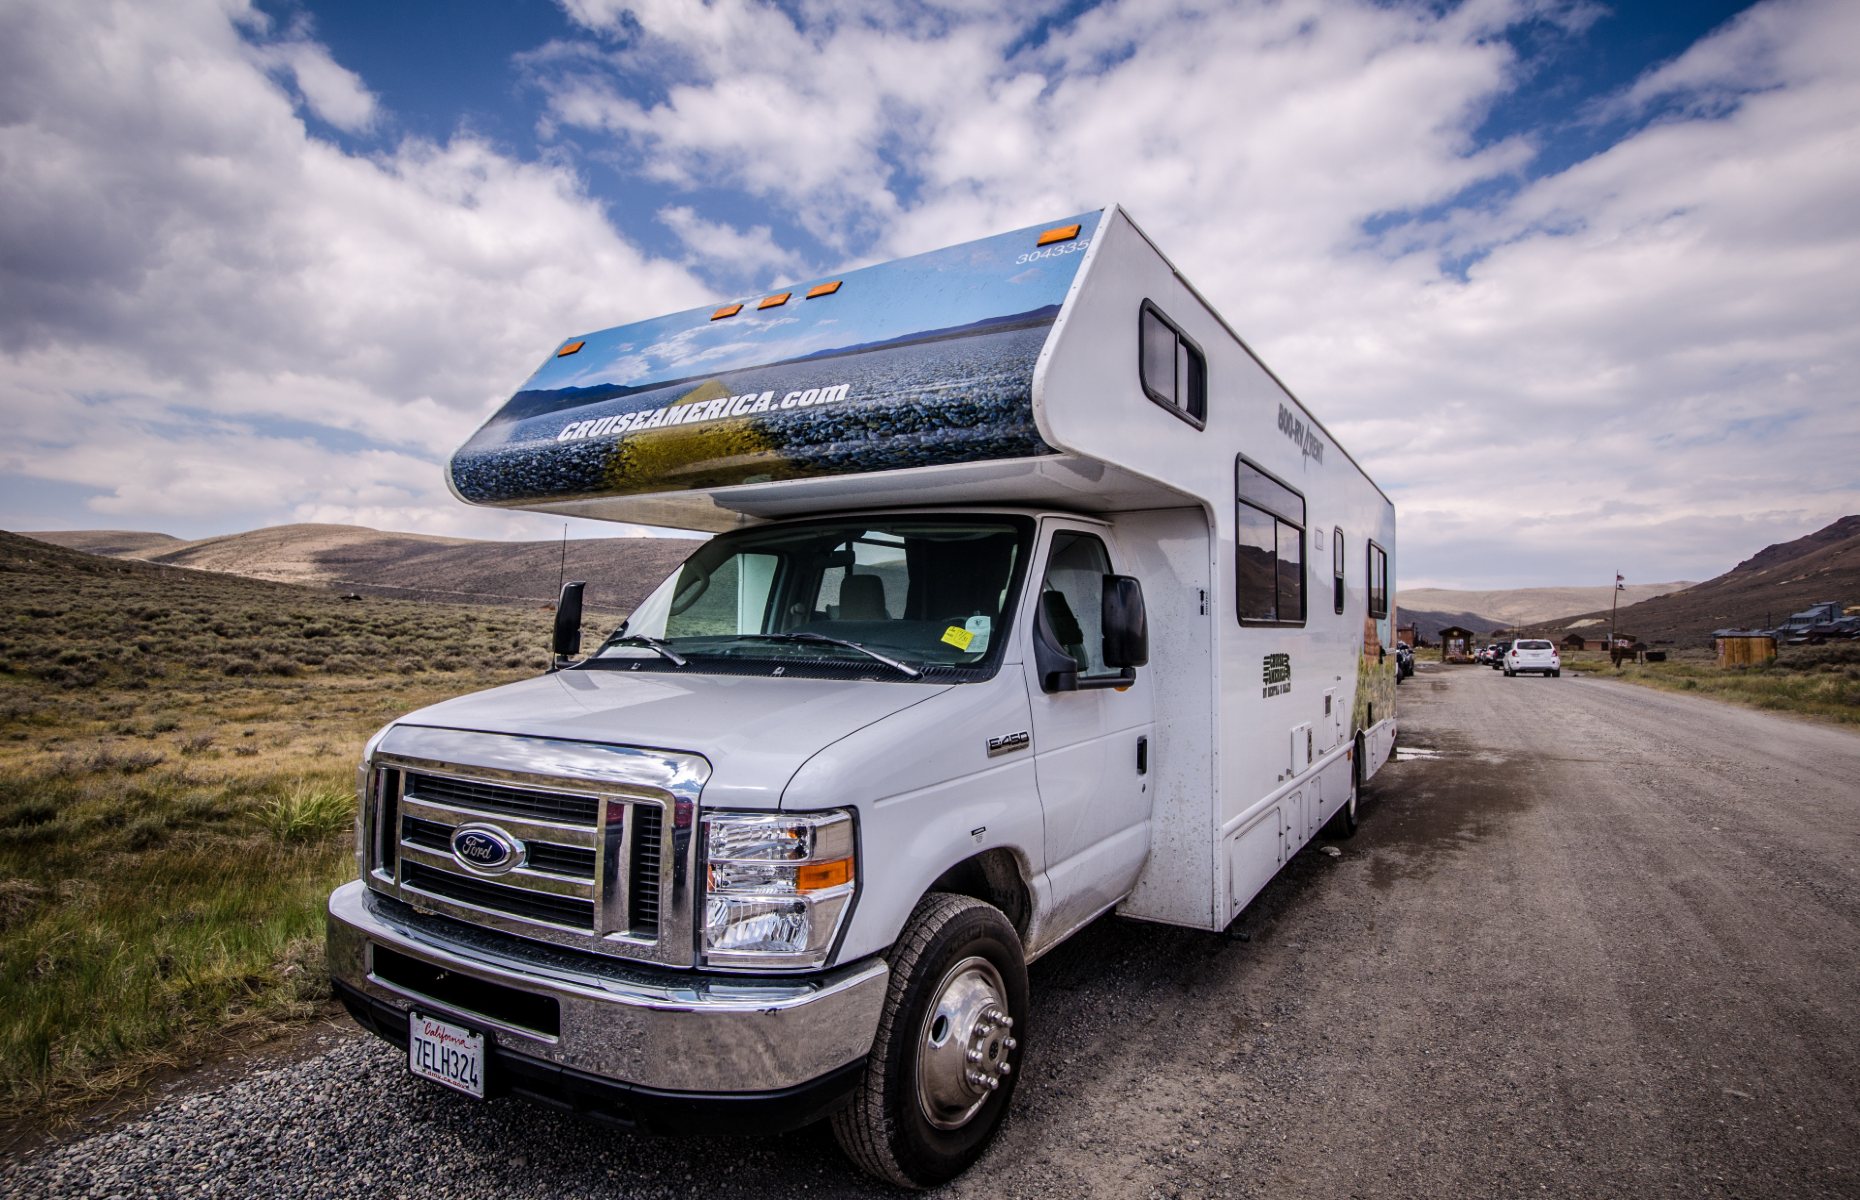 RV parked up in the US (Image: melissamn/Shutterstock)